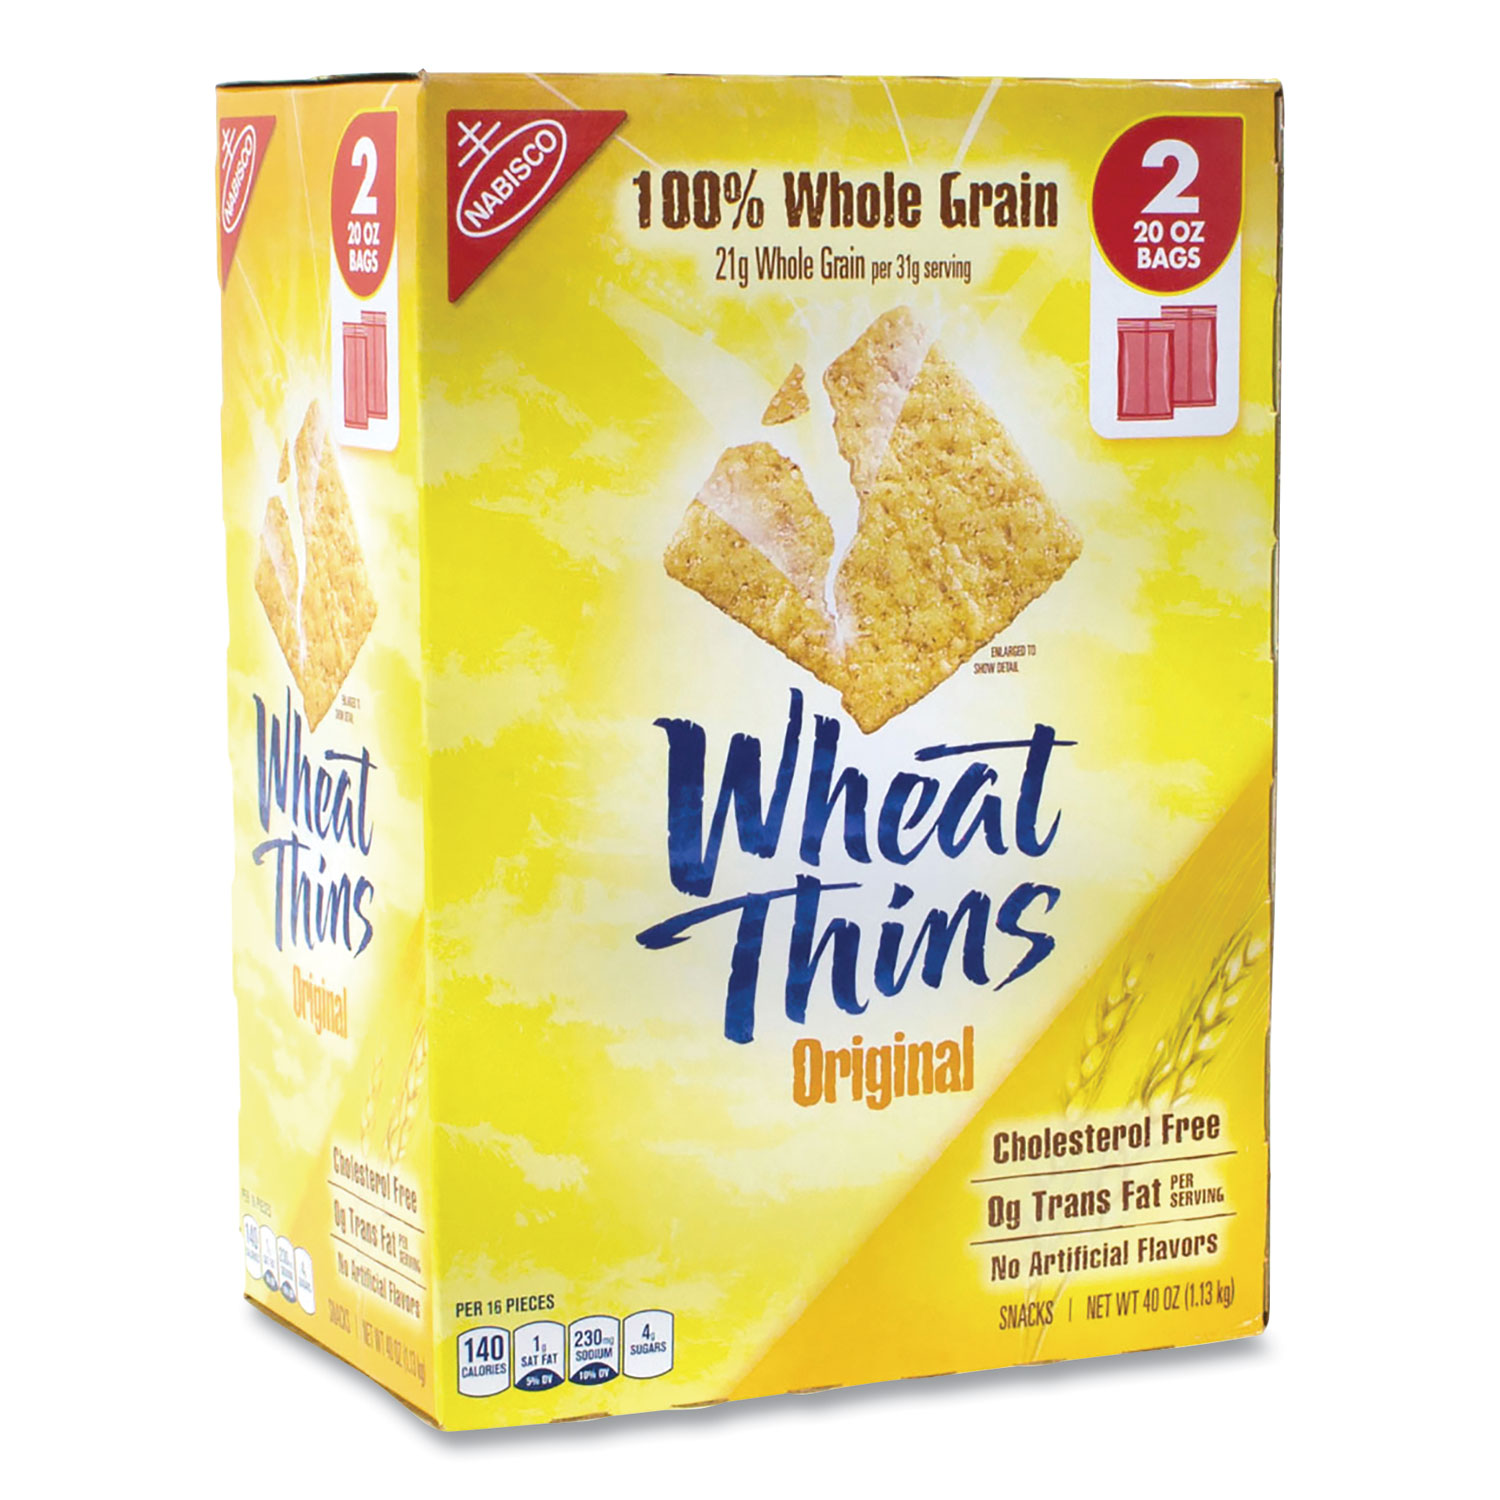 Nabisco® Wheat Thins Crackers, Original, 20 oz Bag, 2 Bags/Box, Free Delivery in 1-4 Business Days